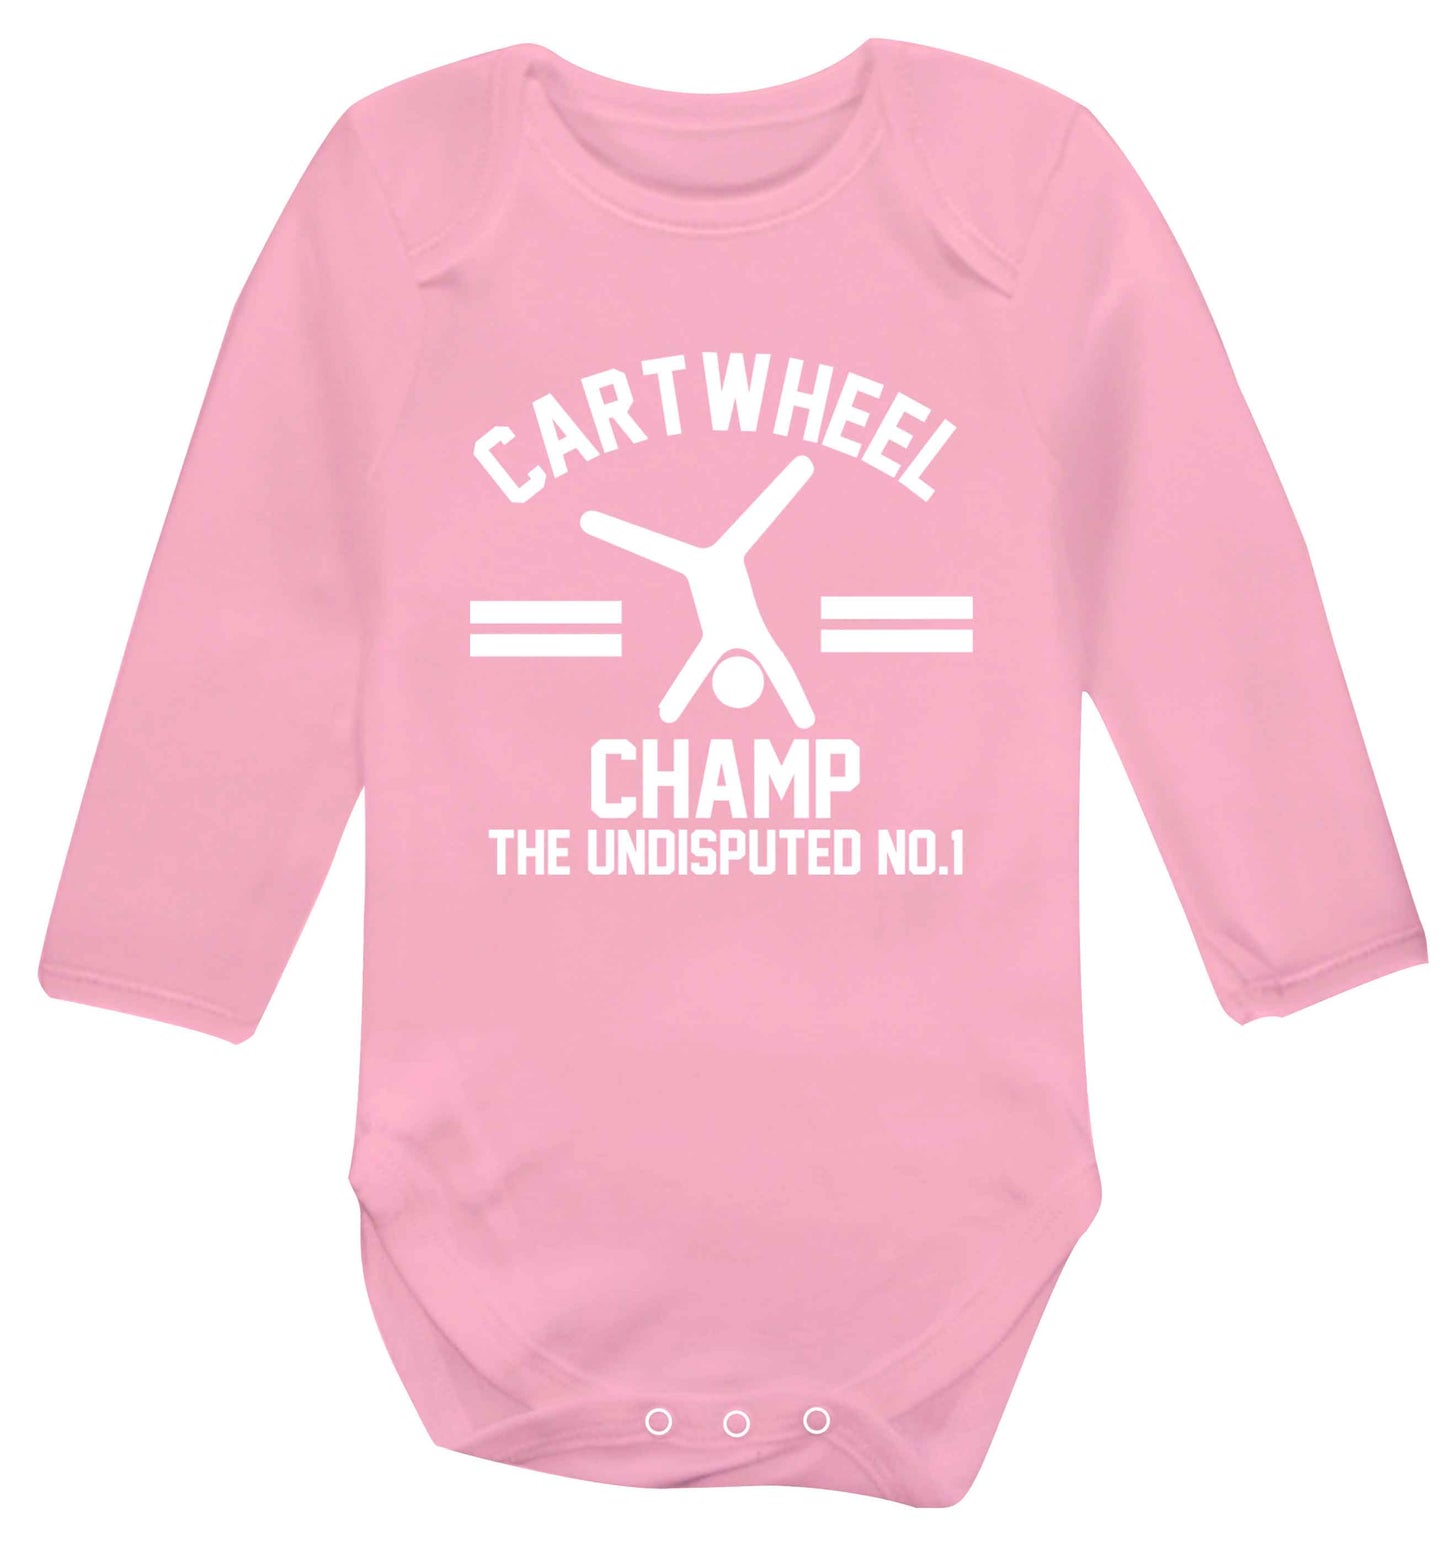 Undisputed cartwheel championship no.1  Baby Vest long sleeved pale pink 6-12 months